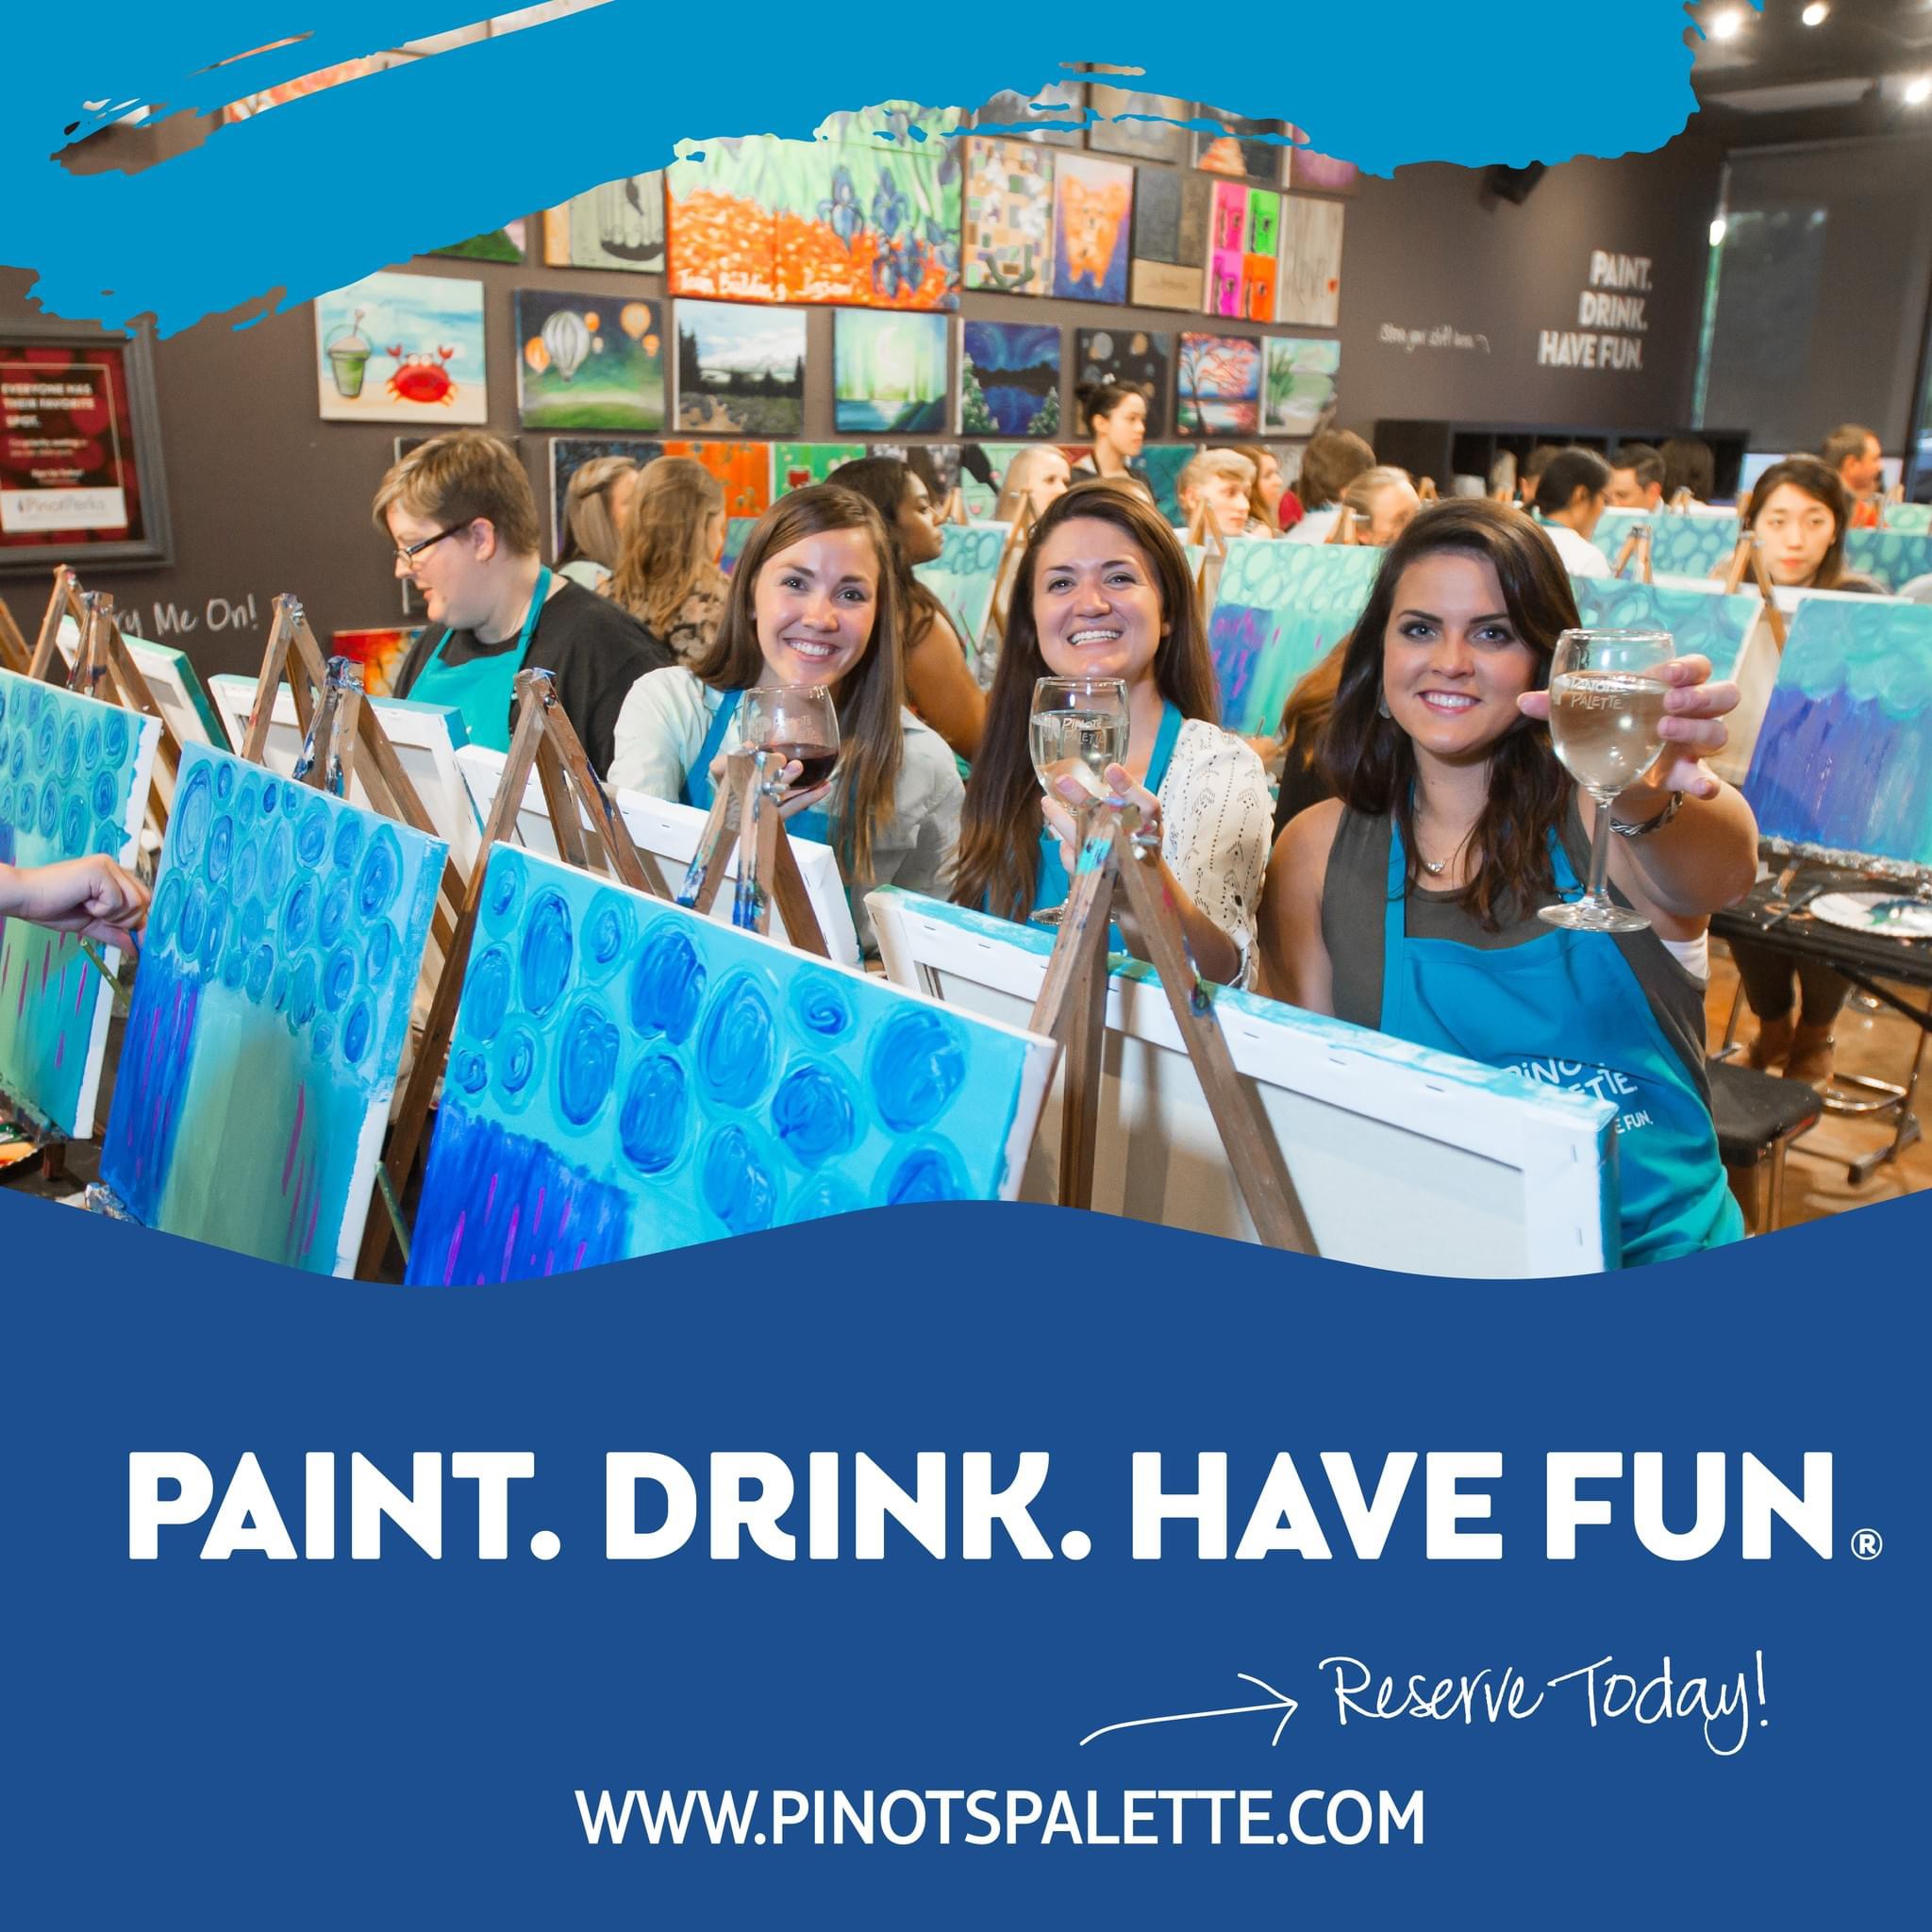 Dive into April Creativity: Join Our Spring Painting Classes at Pinot's Palette!